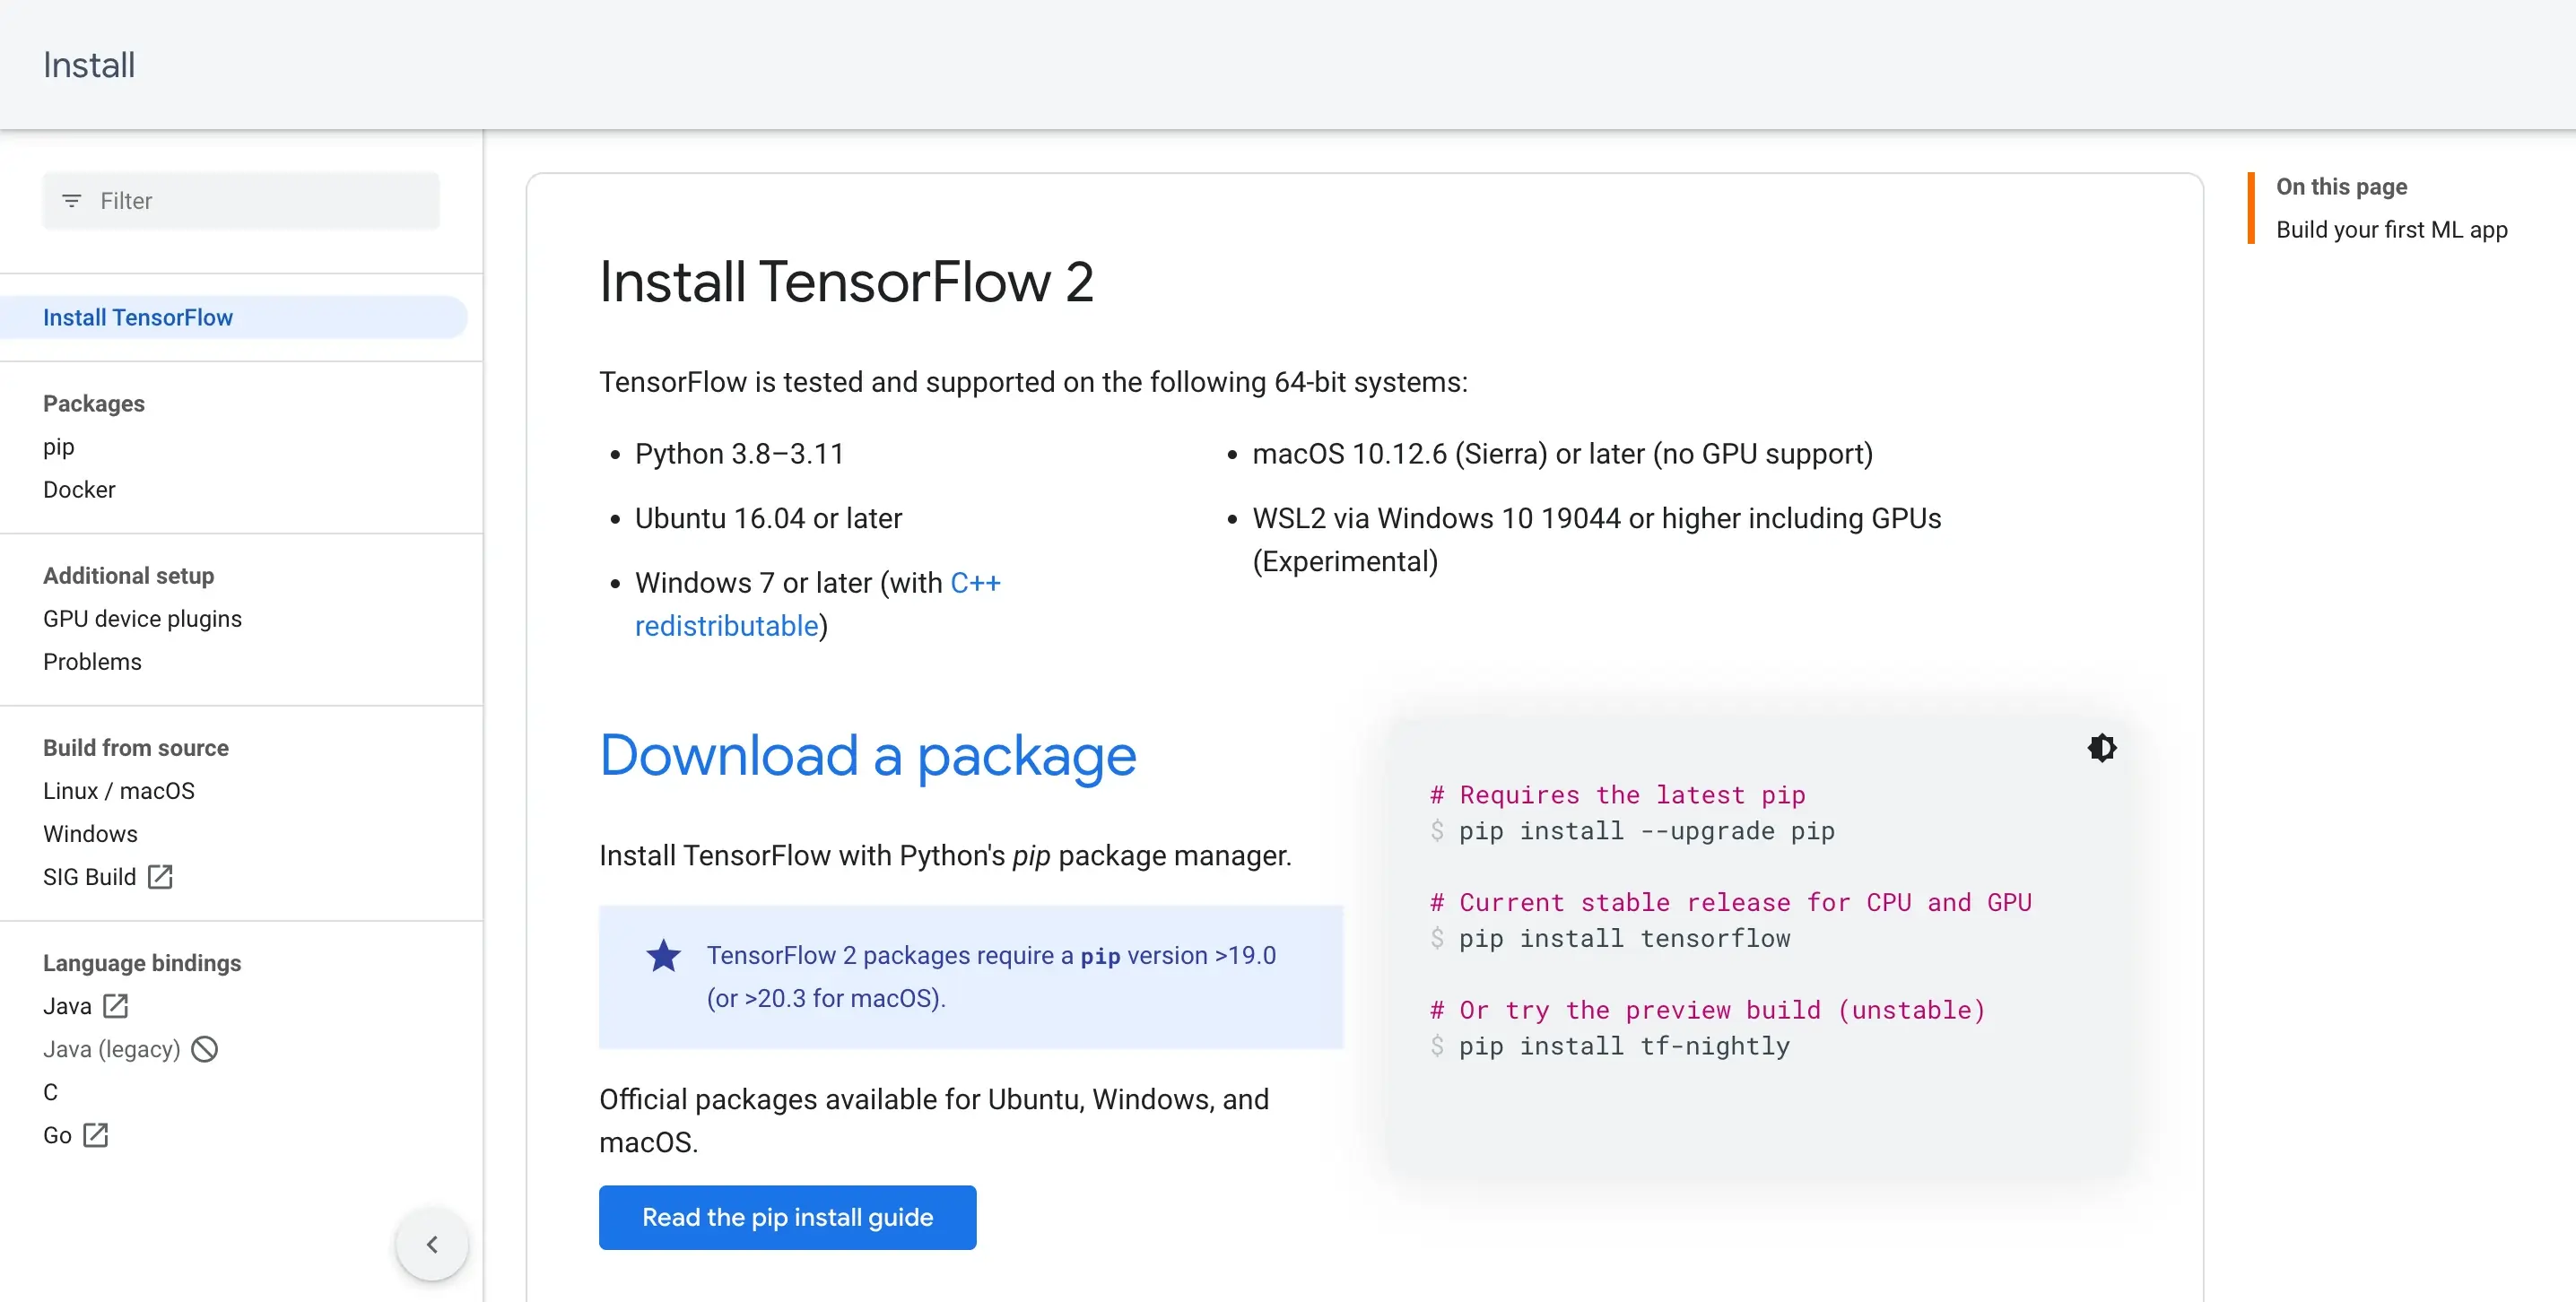 How to Install TensorFlow: A Step-by-Step Guide